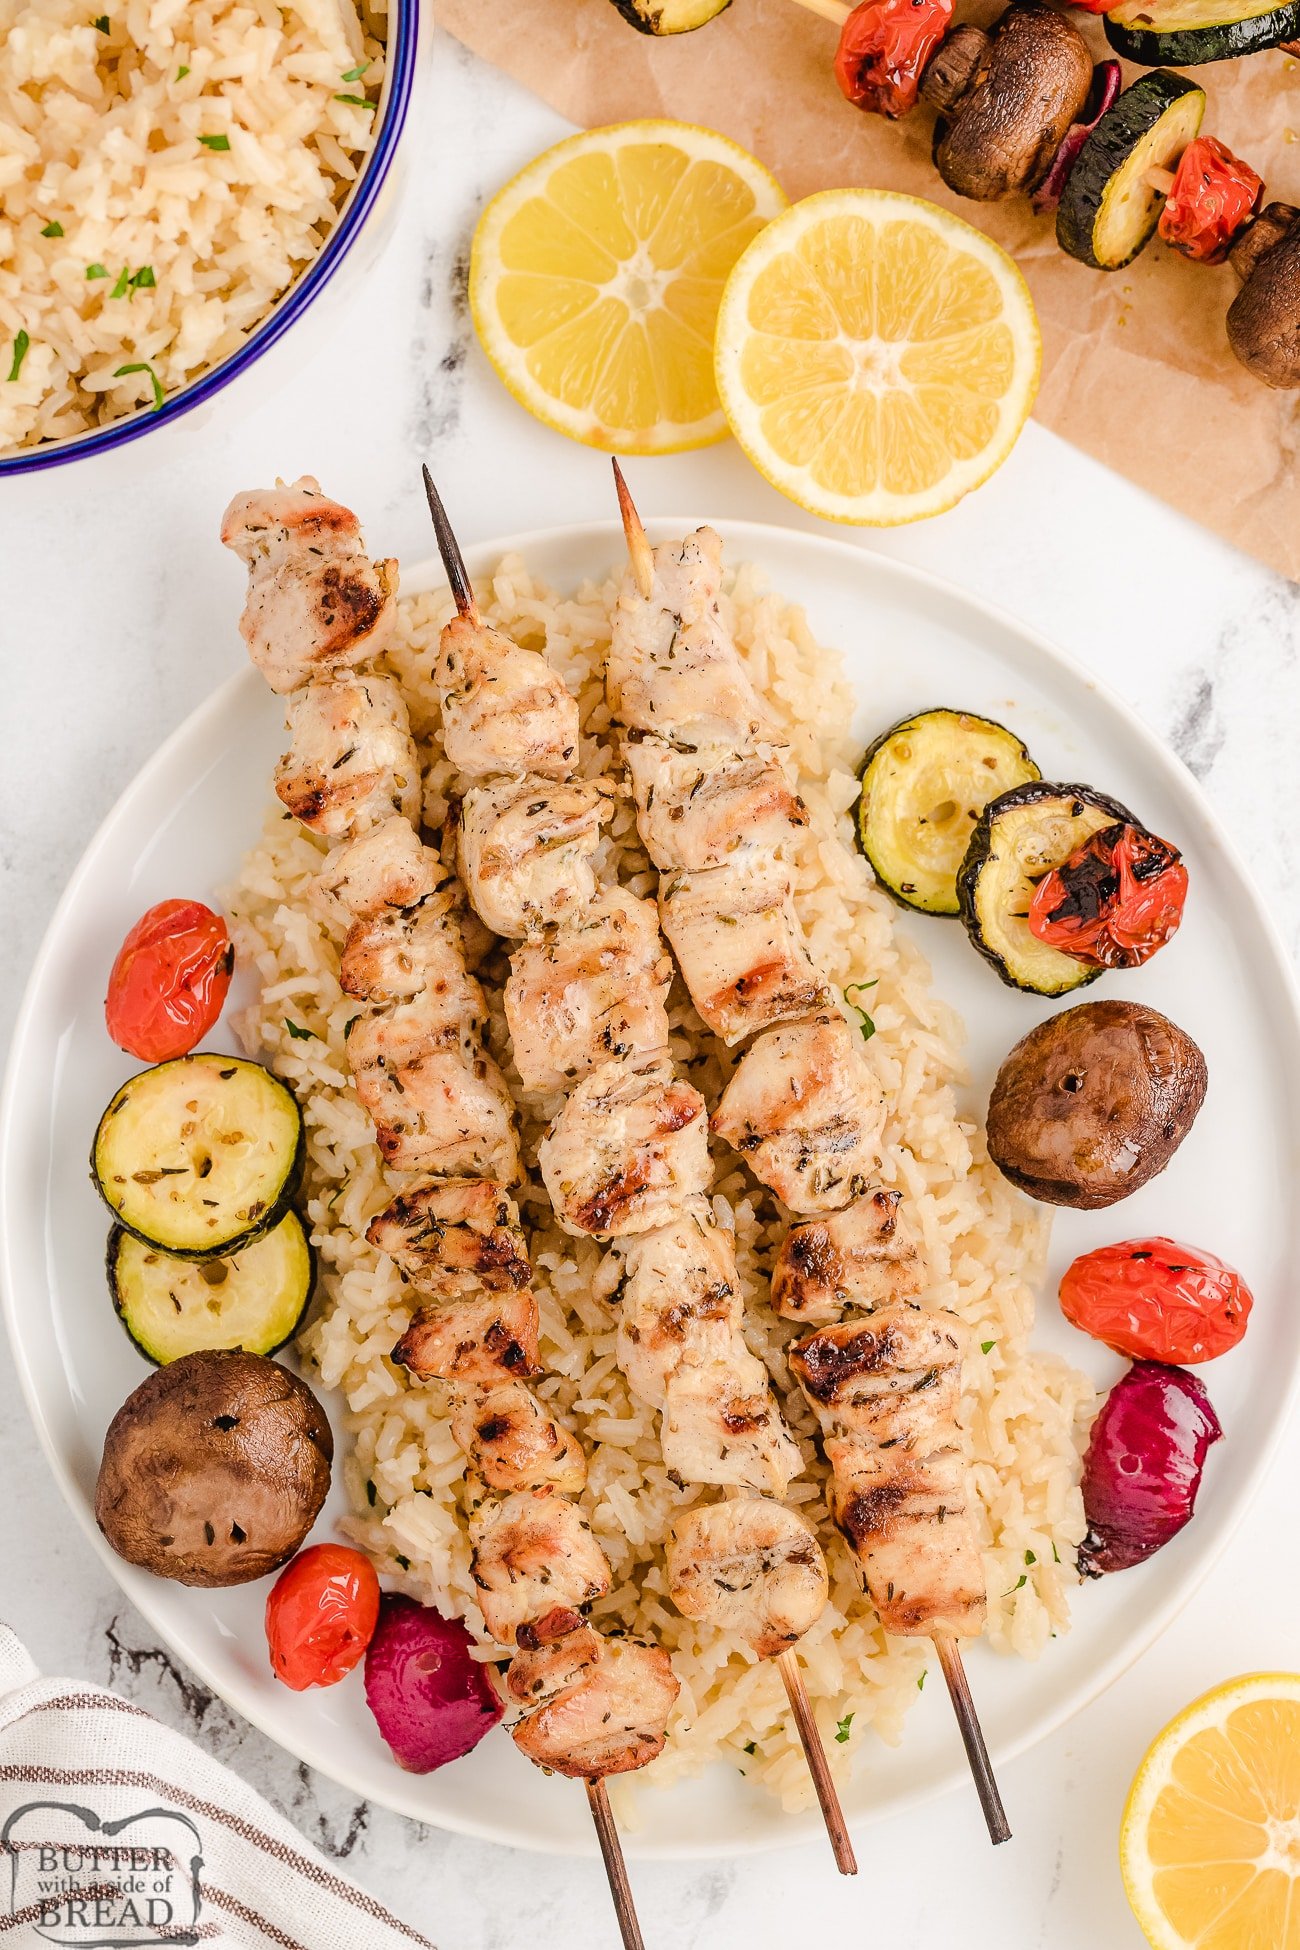 Greek chicken on a skewer, served with lemon rice